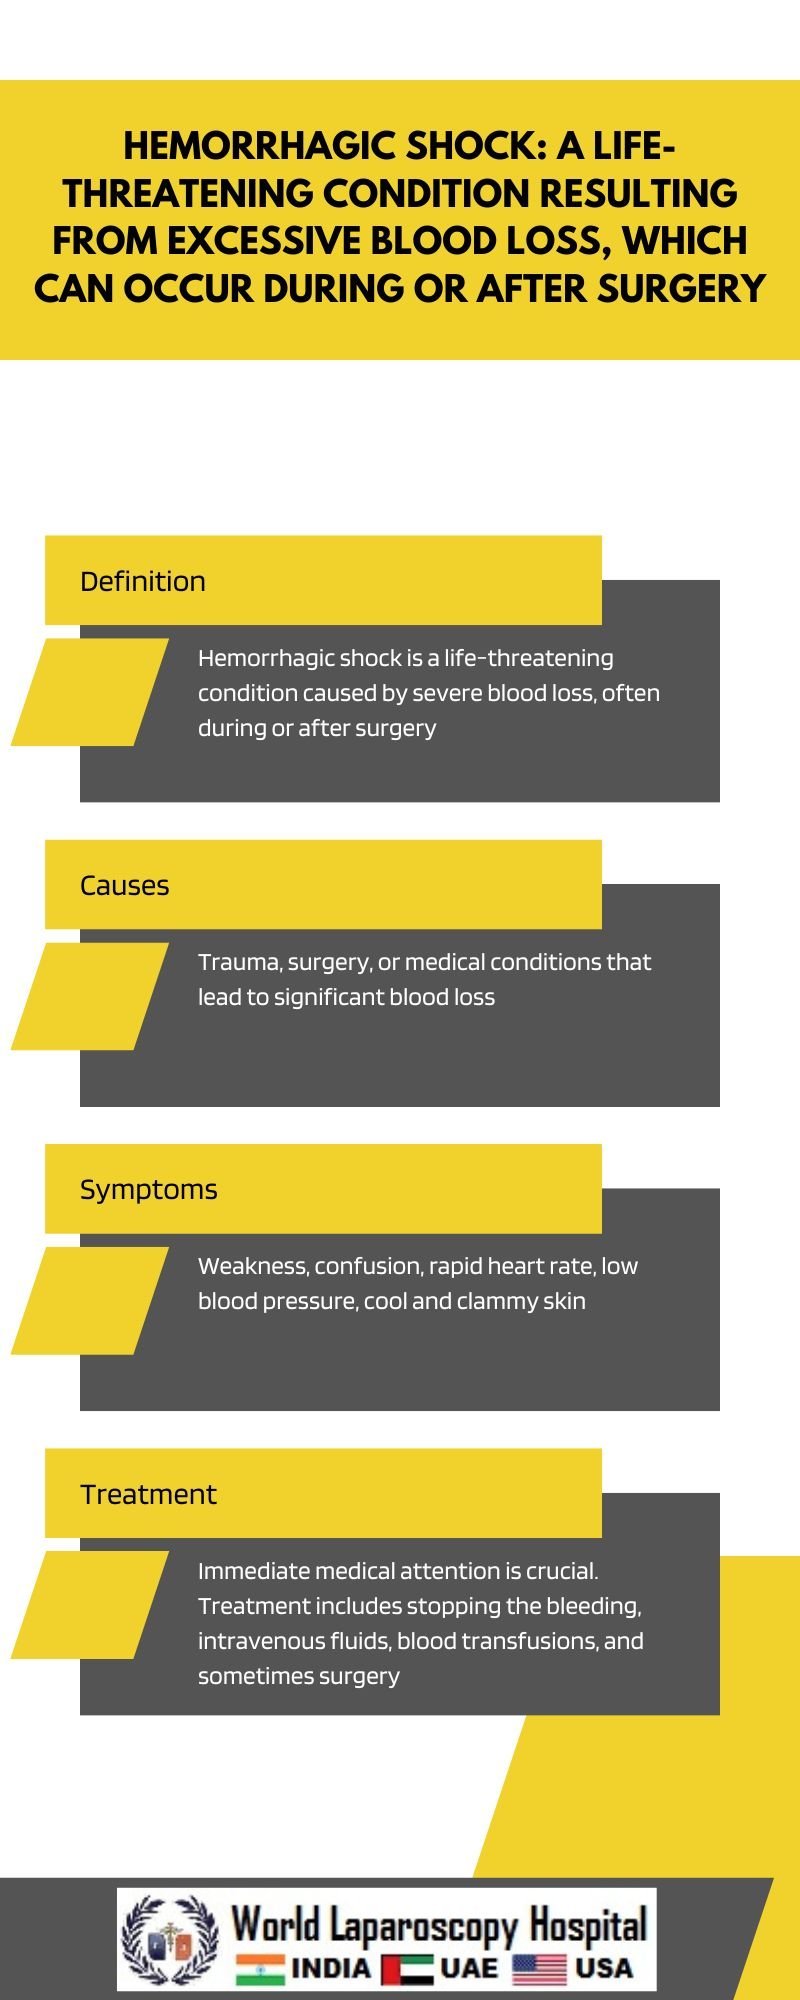 Hemorrhagic shock: A life-threatening condition resulting from excessive blood loss, which can occur during or after surgery